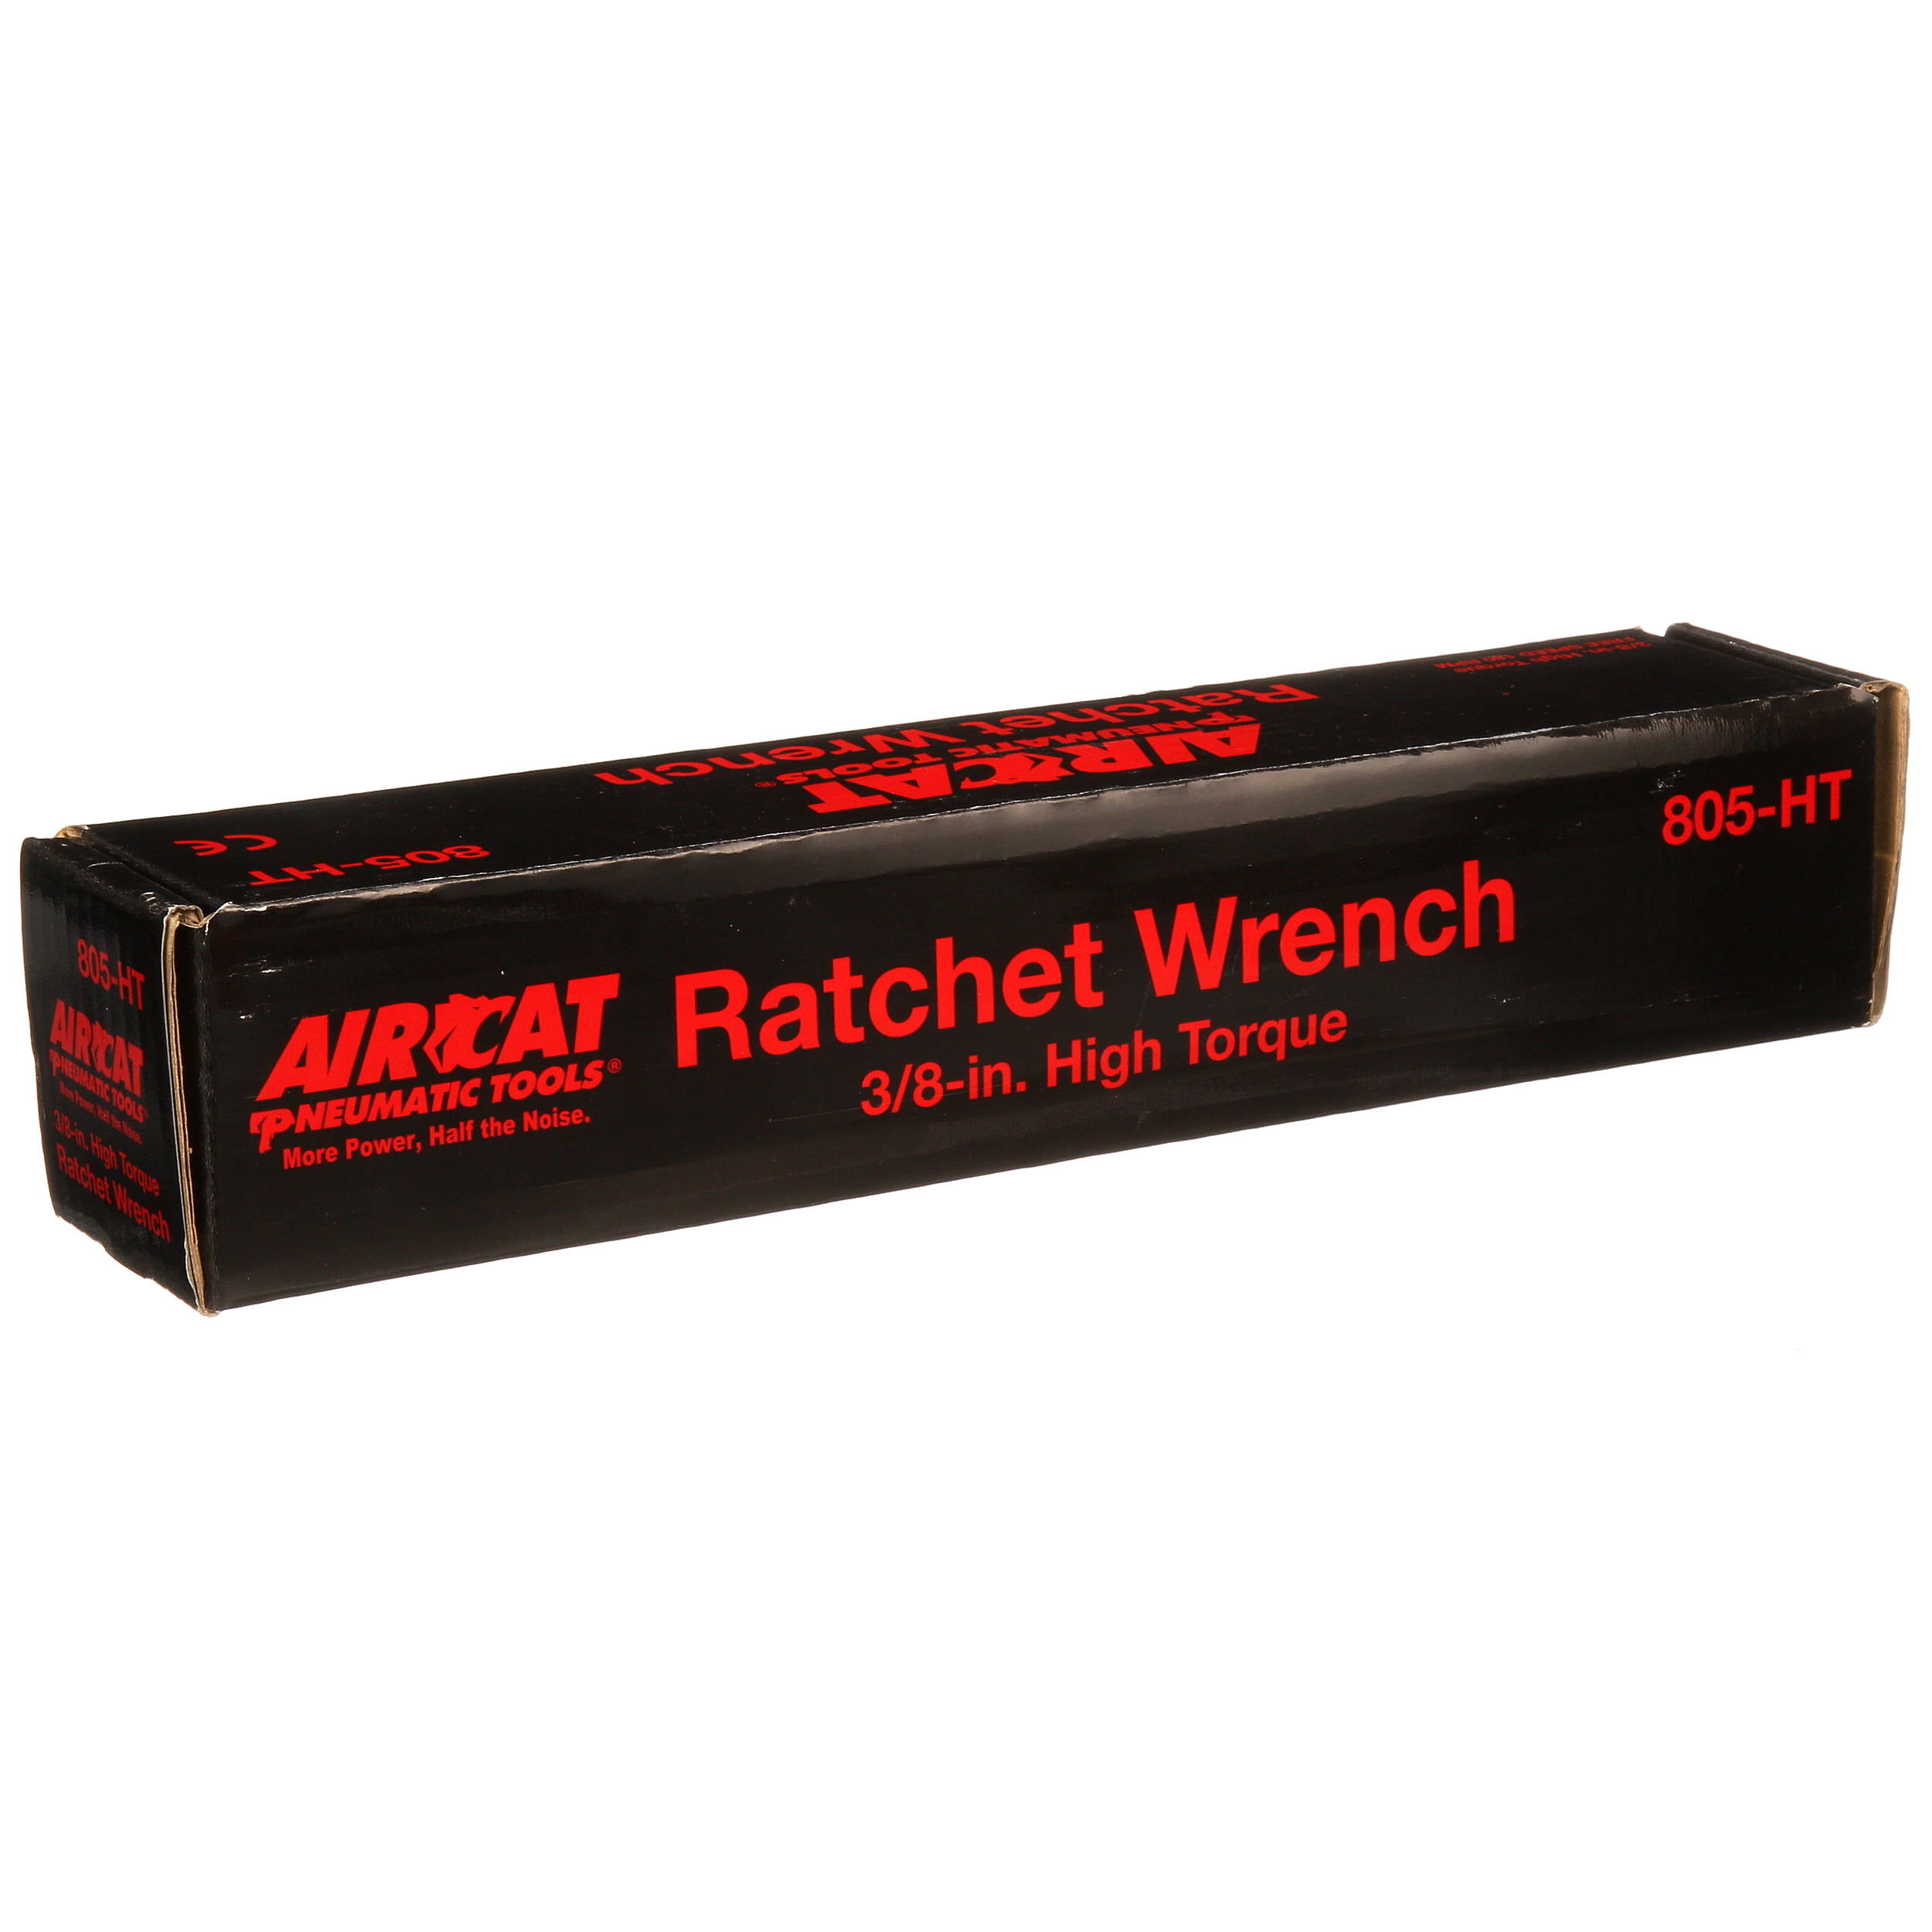 AIRCAT 805-HT 3/8-Inch High Torque Ratchet Wrench 130 ft-lbs